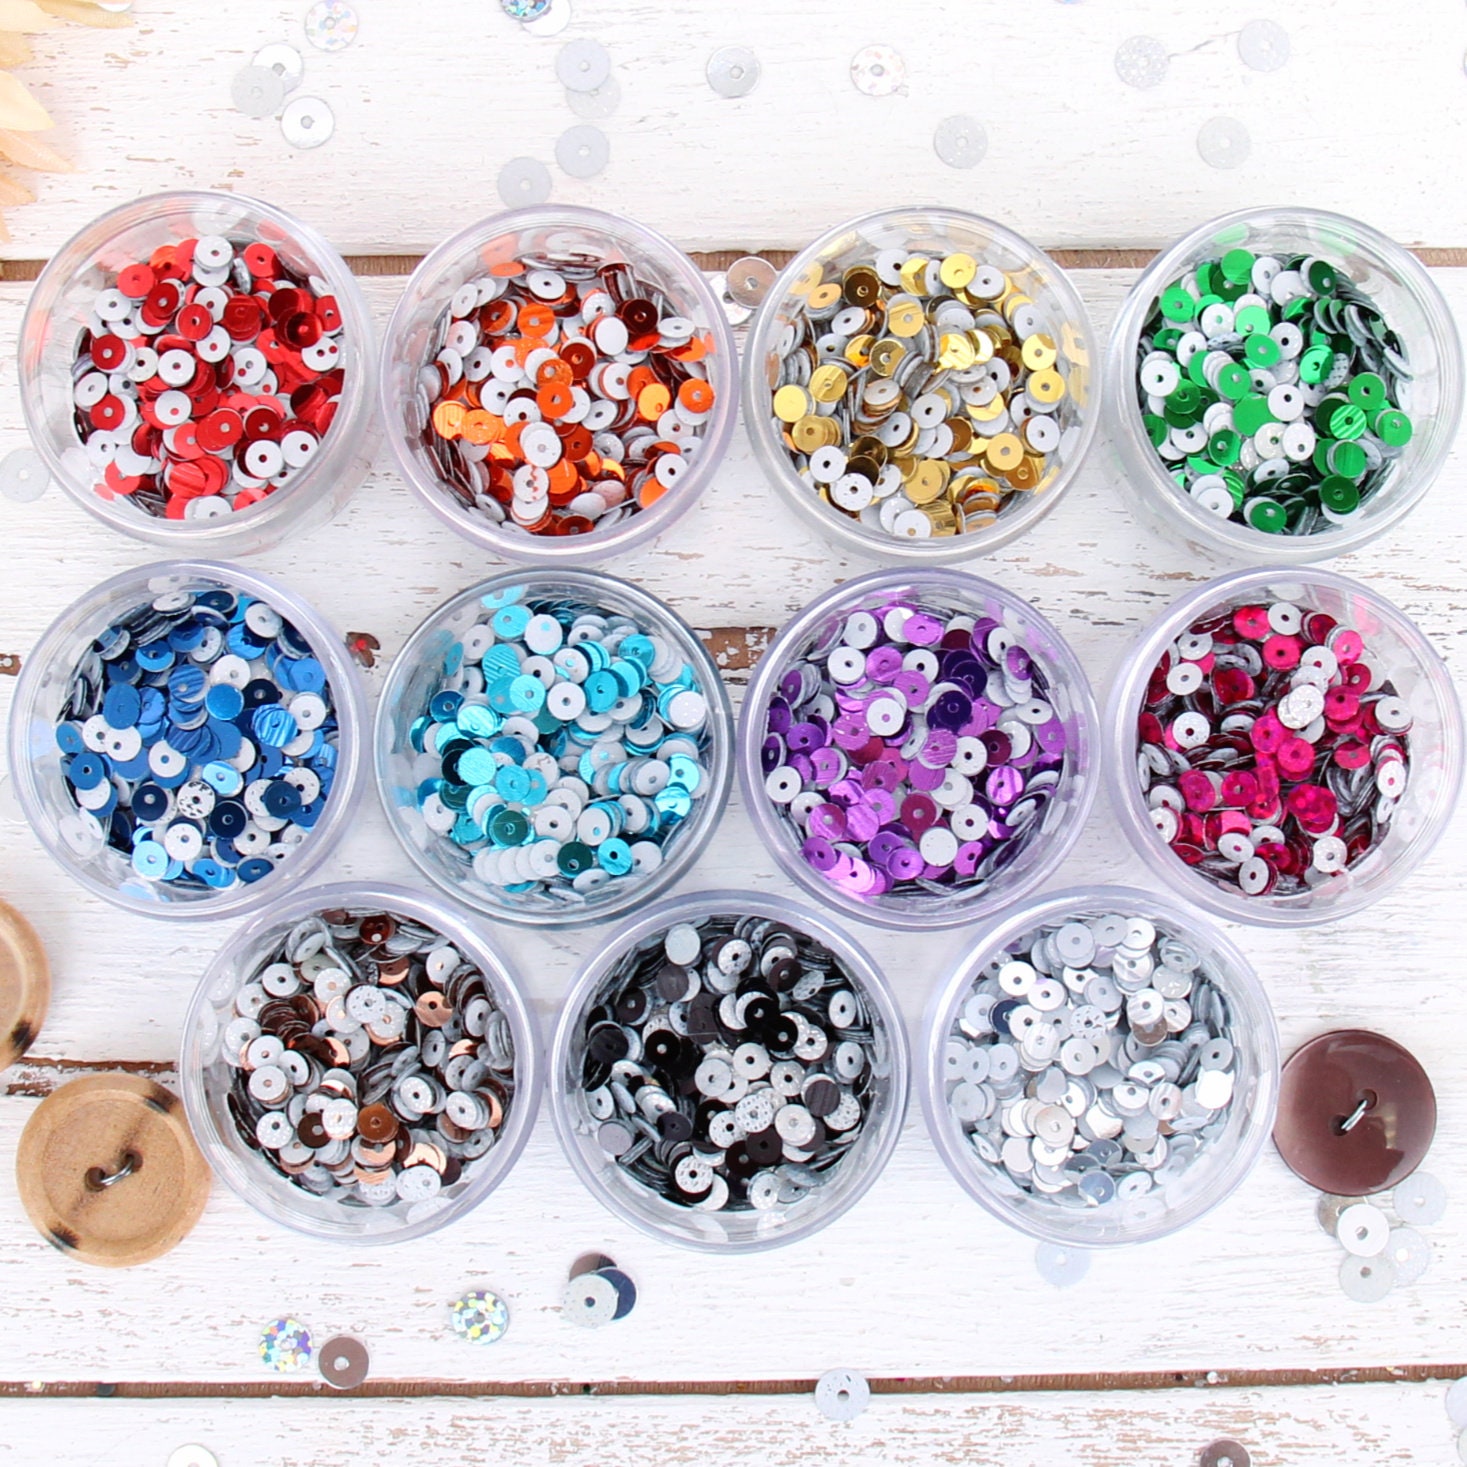  OLYCRAFT 300G 10 Colors Large Craft Sequins 1.2 Inch Loose  Sequins with Hole Colorful Sequins Craft Paillettes Round Loose Sequins  Embellishment Sequins for Jewelry Making DIY Sewing Crafts